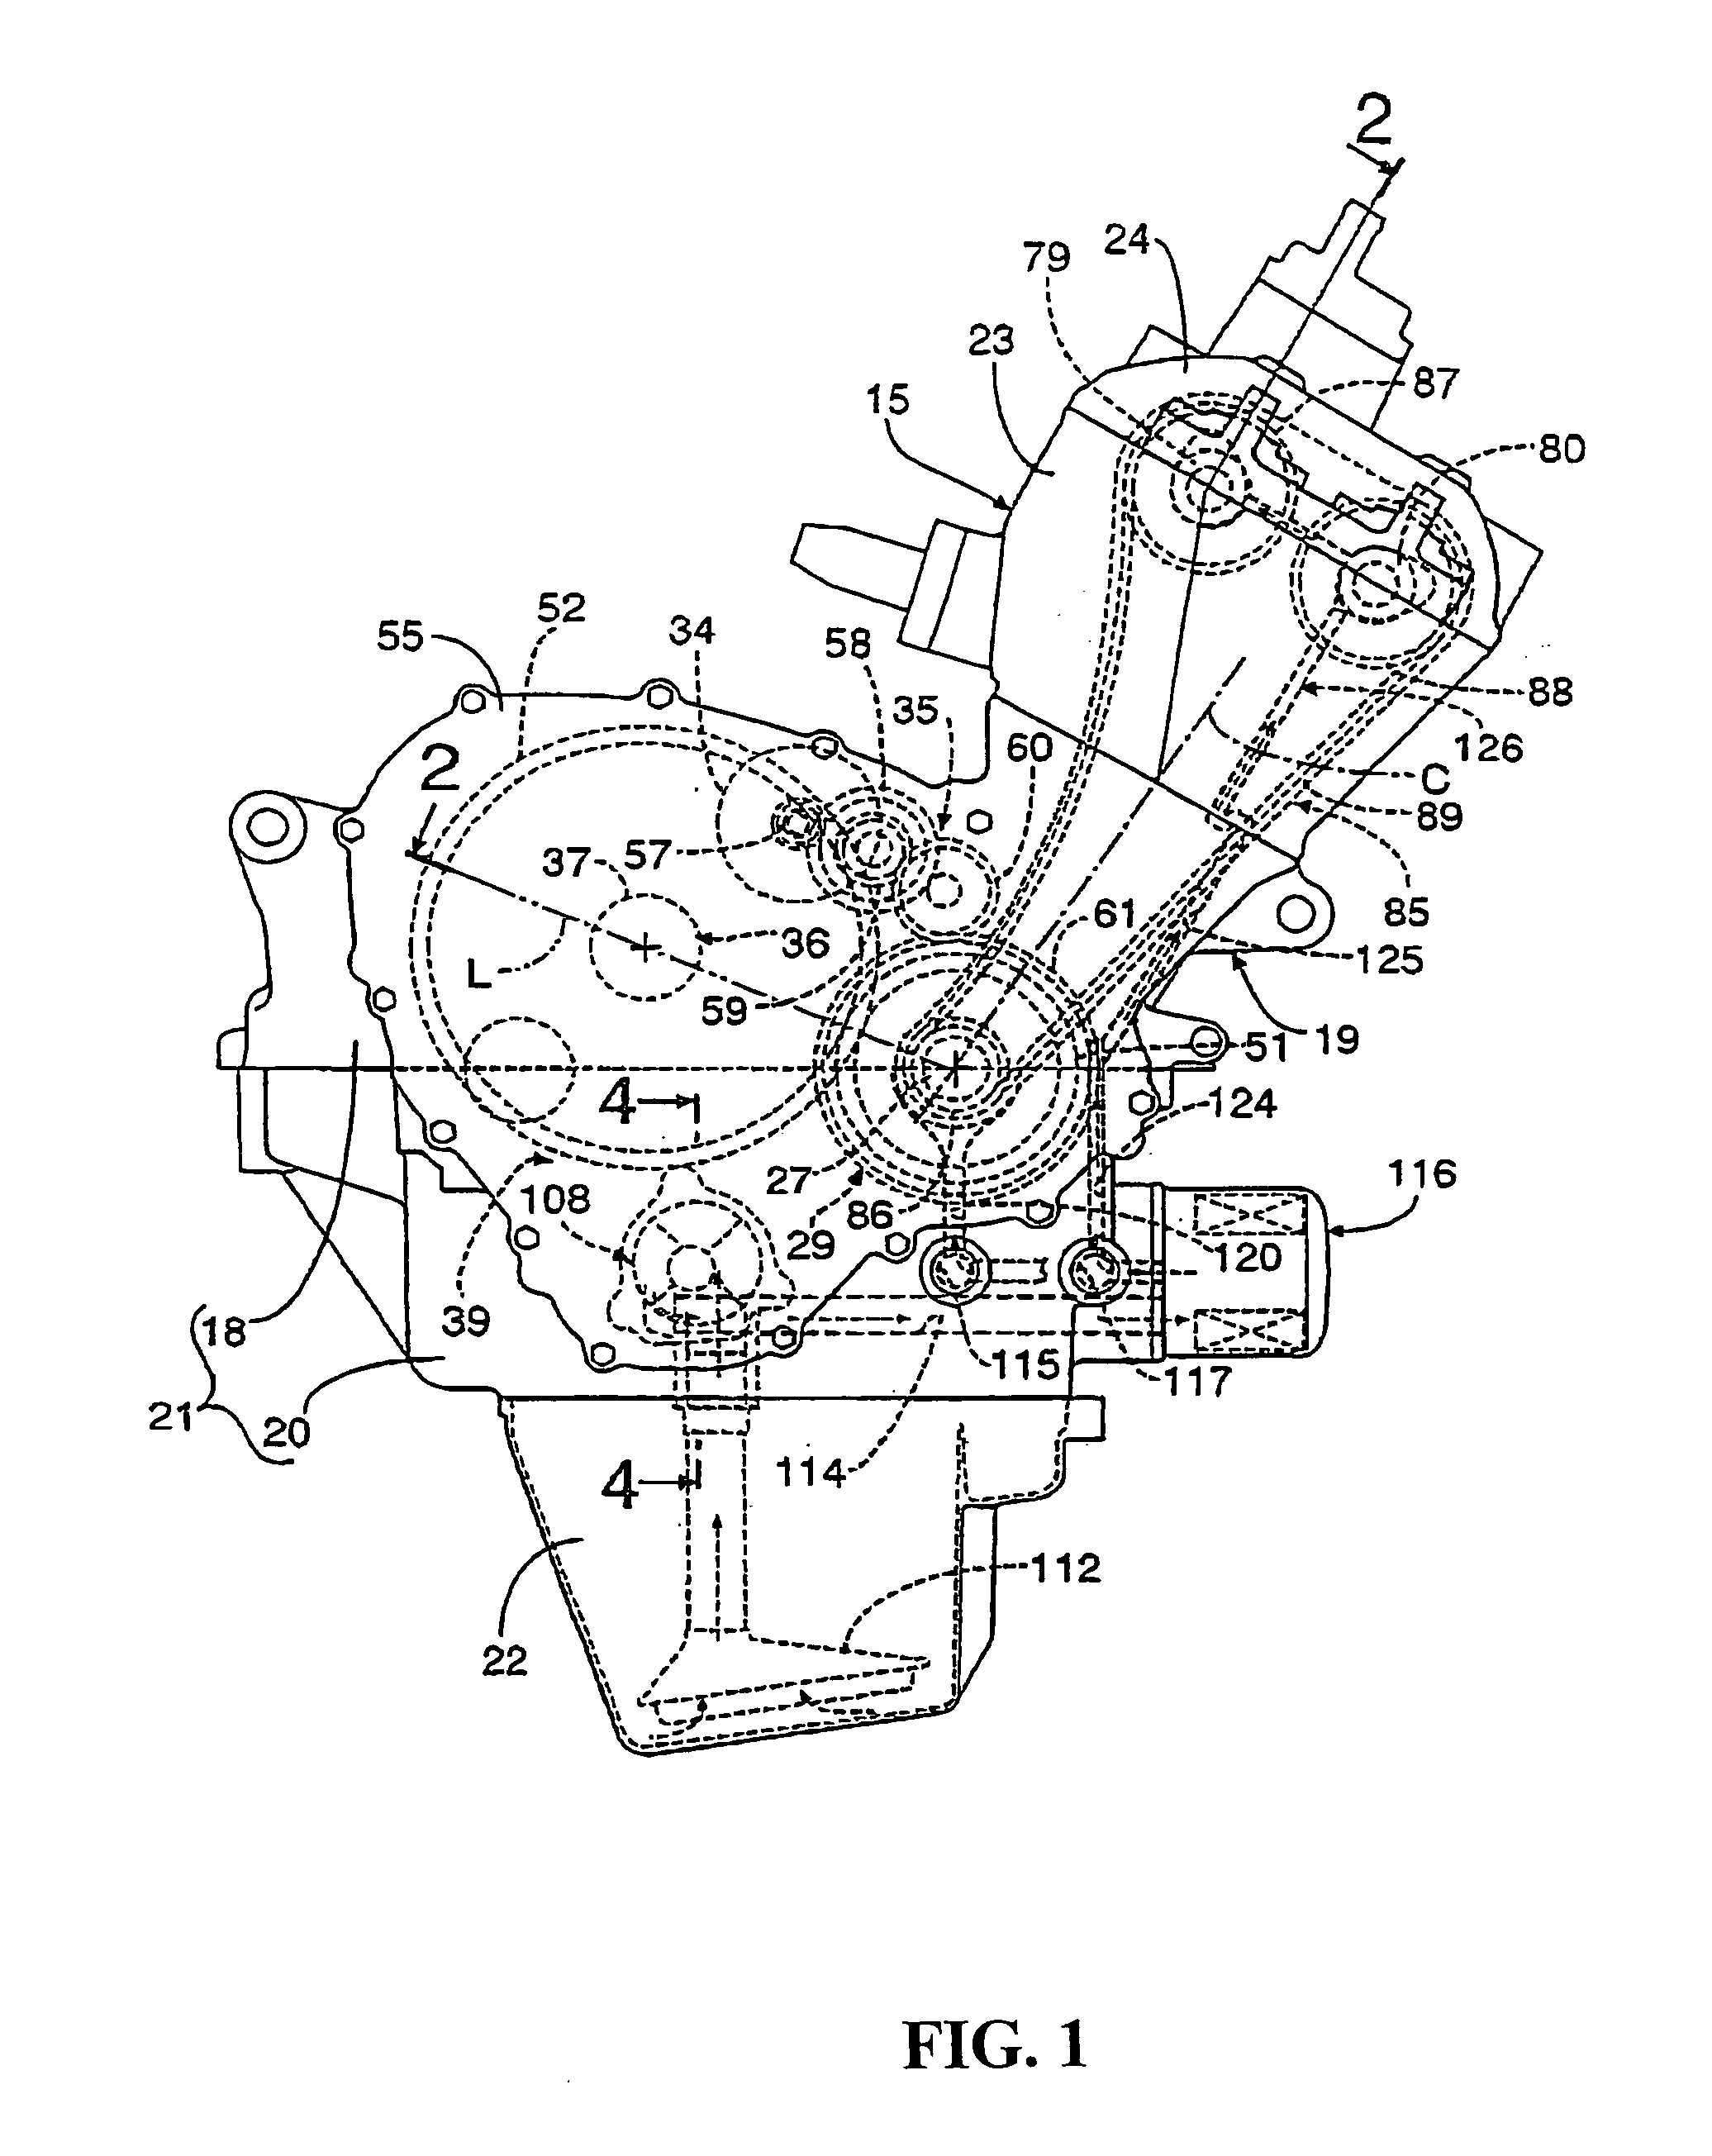 Water pump for cooling engine